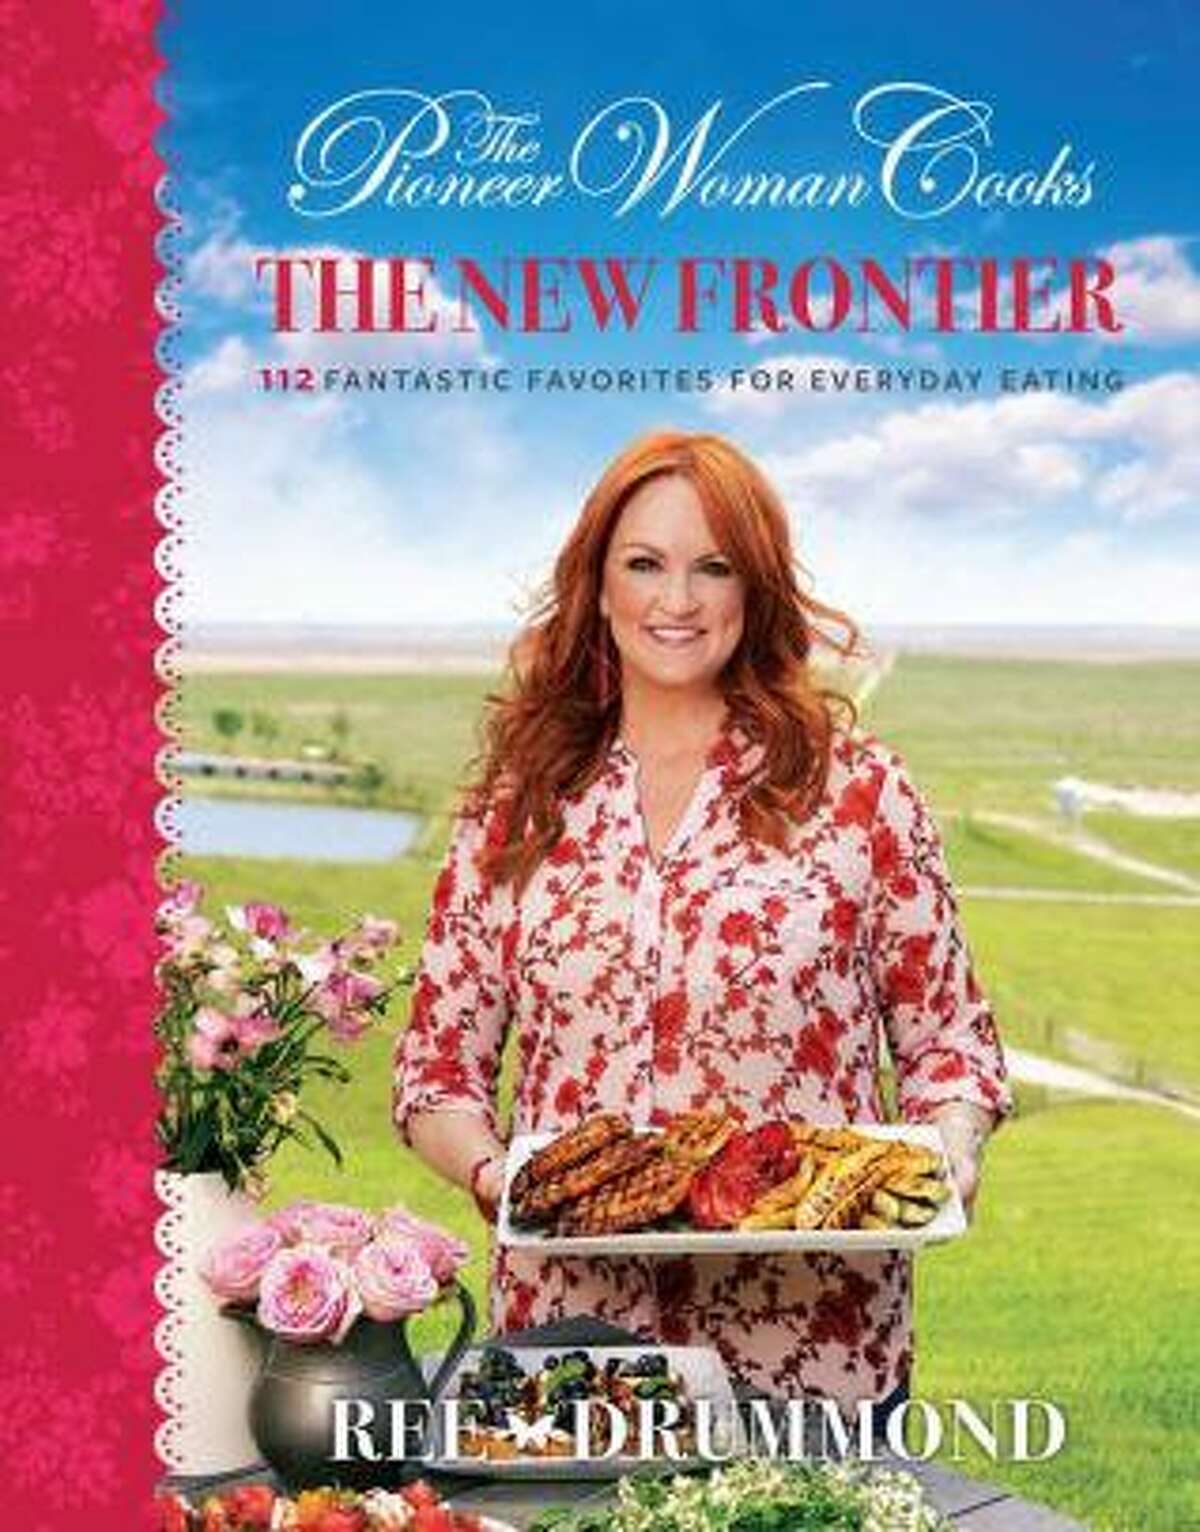 Ree Drummond, "The Pioneer Woman" will be at Katy Mills for a book signing this week.